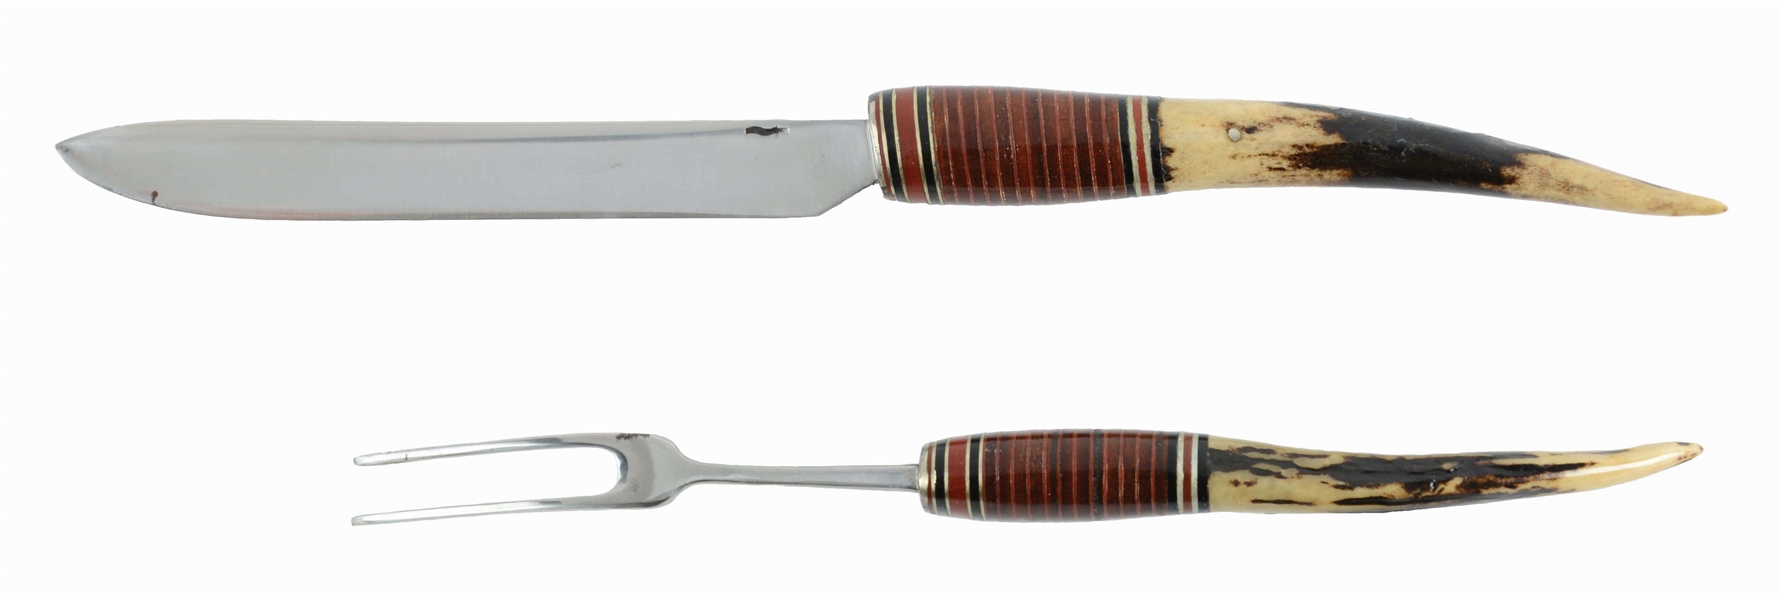 ELEGANT WILLIAM "BILL" SCAGEL TABLE SIZED TWO-PIECE CARVING SET WITH STAG HANDLES.